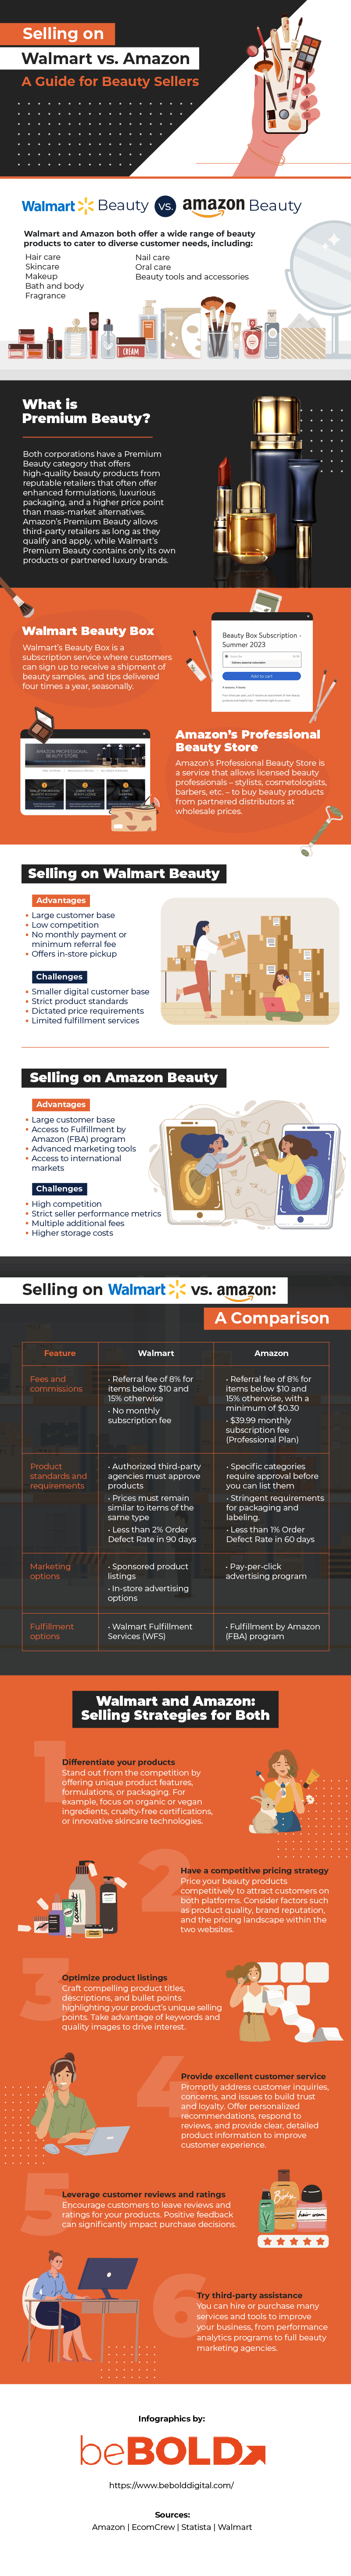 Selling on Walmart vs. Amazon: A Guide for Beauty Sellers